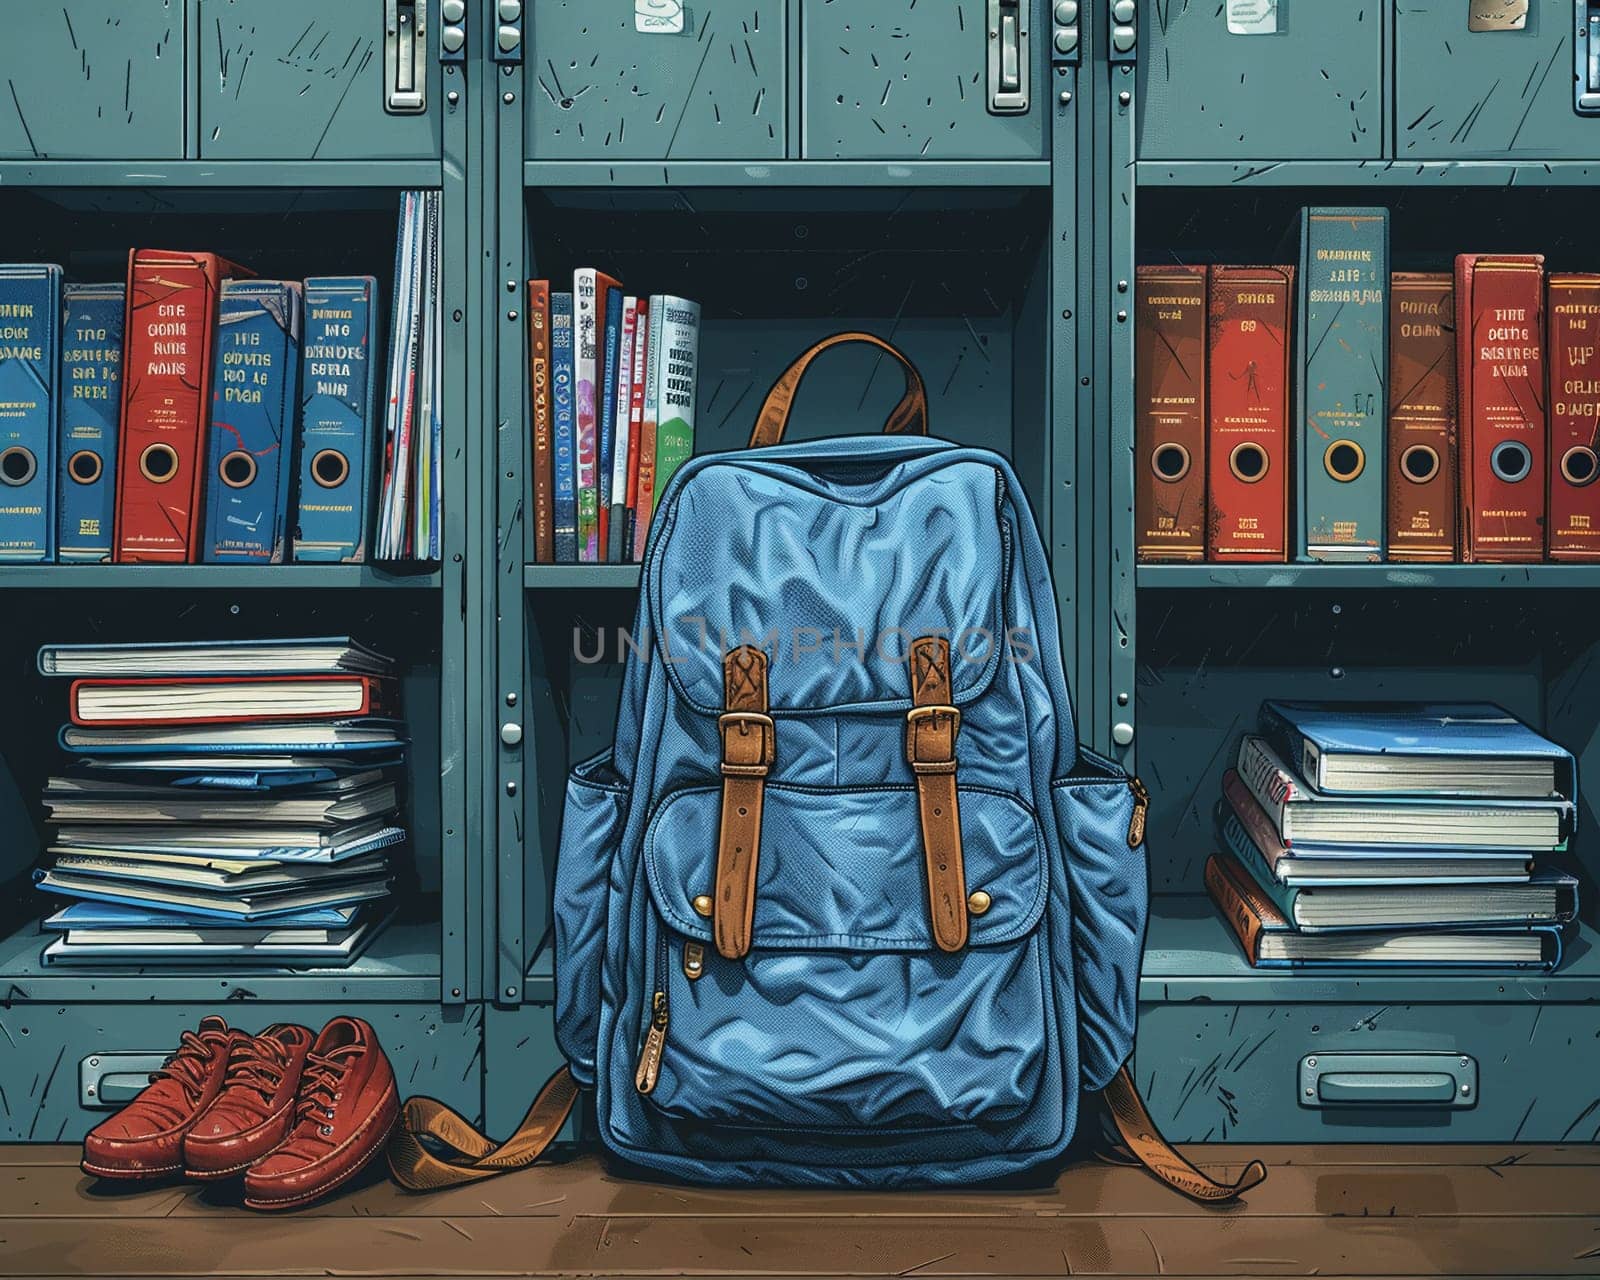 School backpack with books and supplies against a locker, symbolizing education and student life.